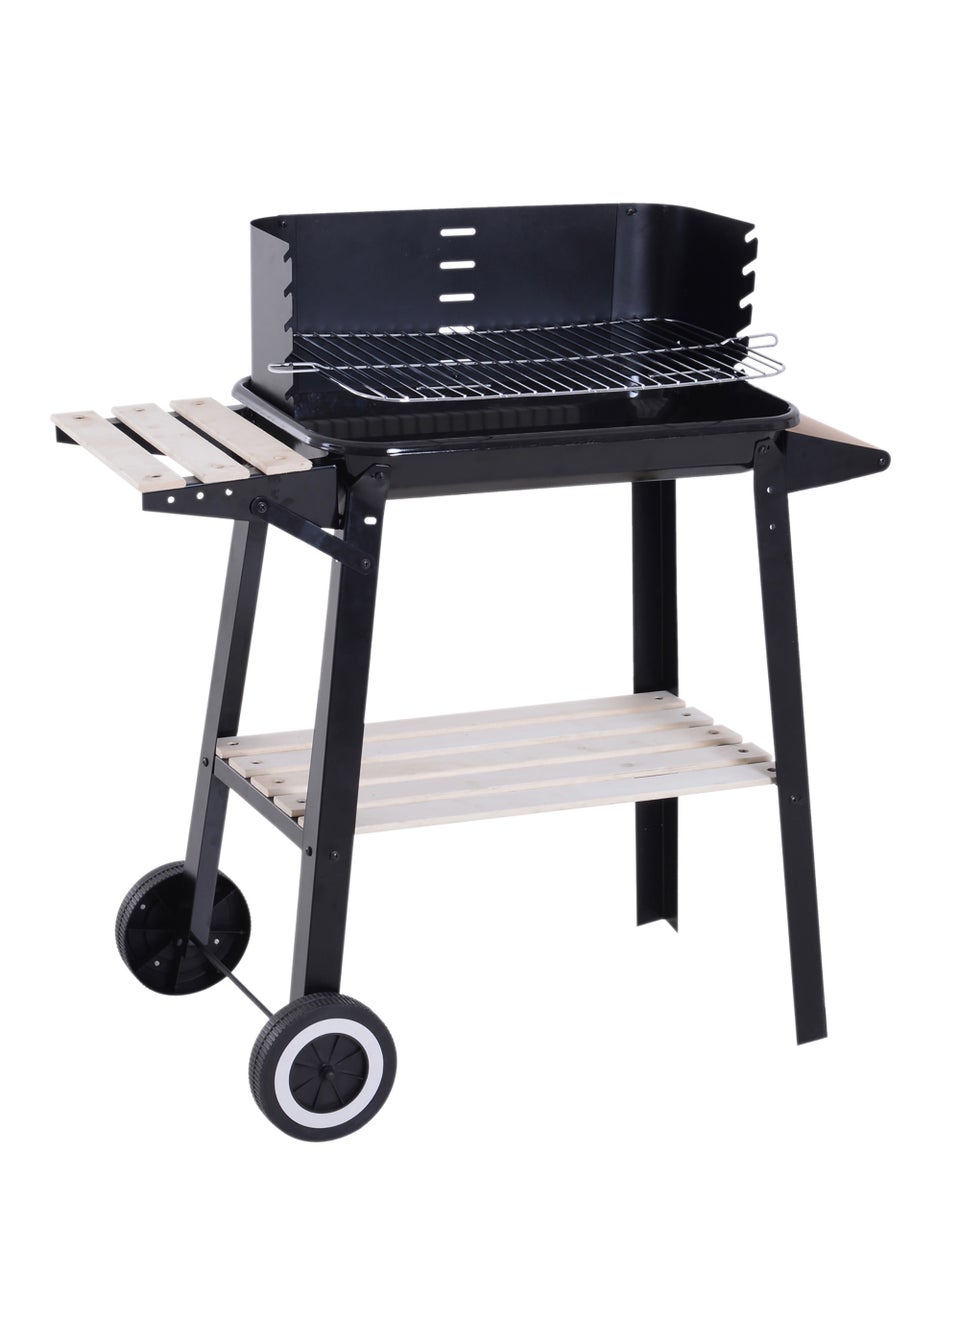 Outsunny Portable Charcoal Barbecue Grill (83cm x 45cm x 87cm)